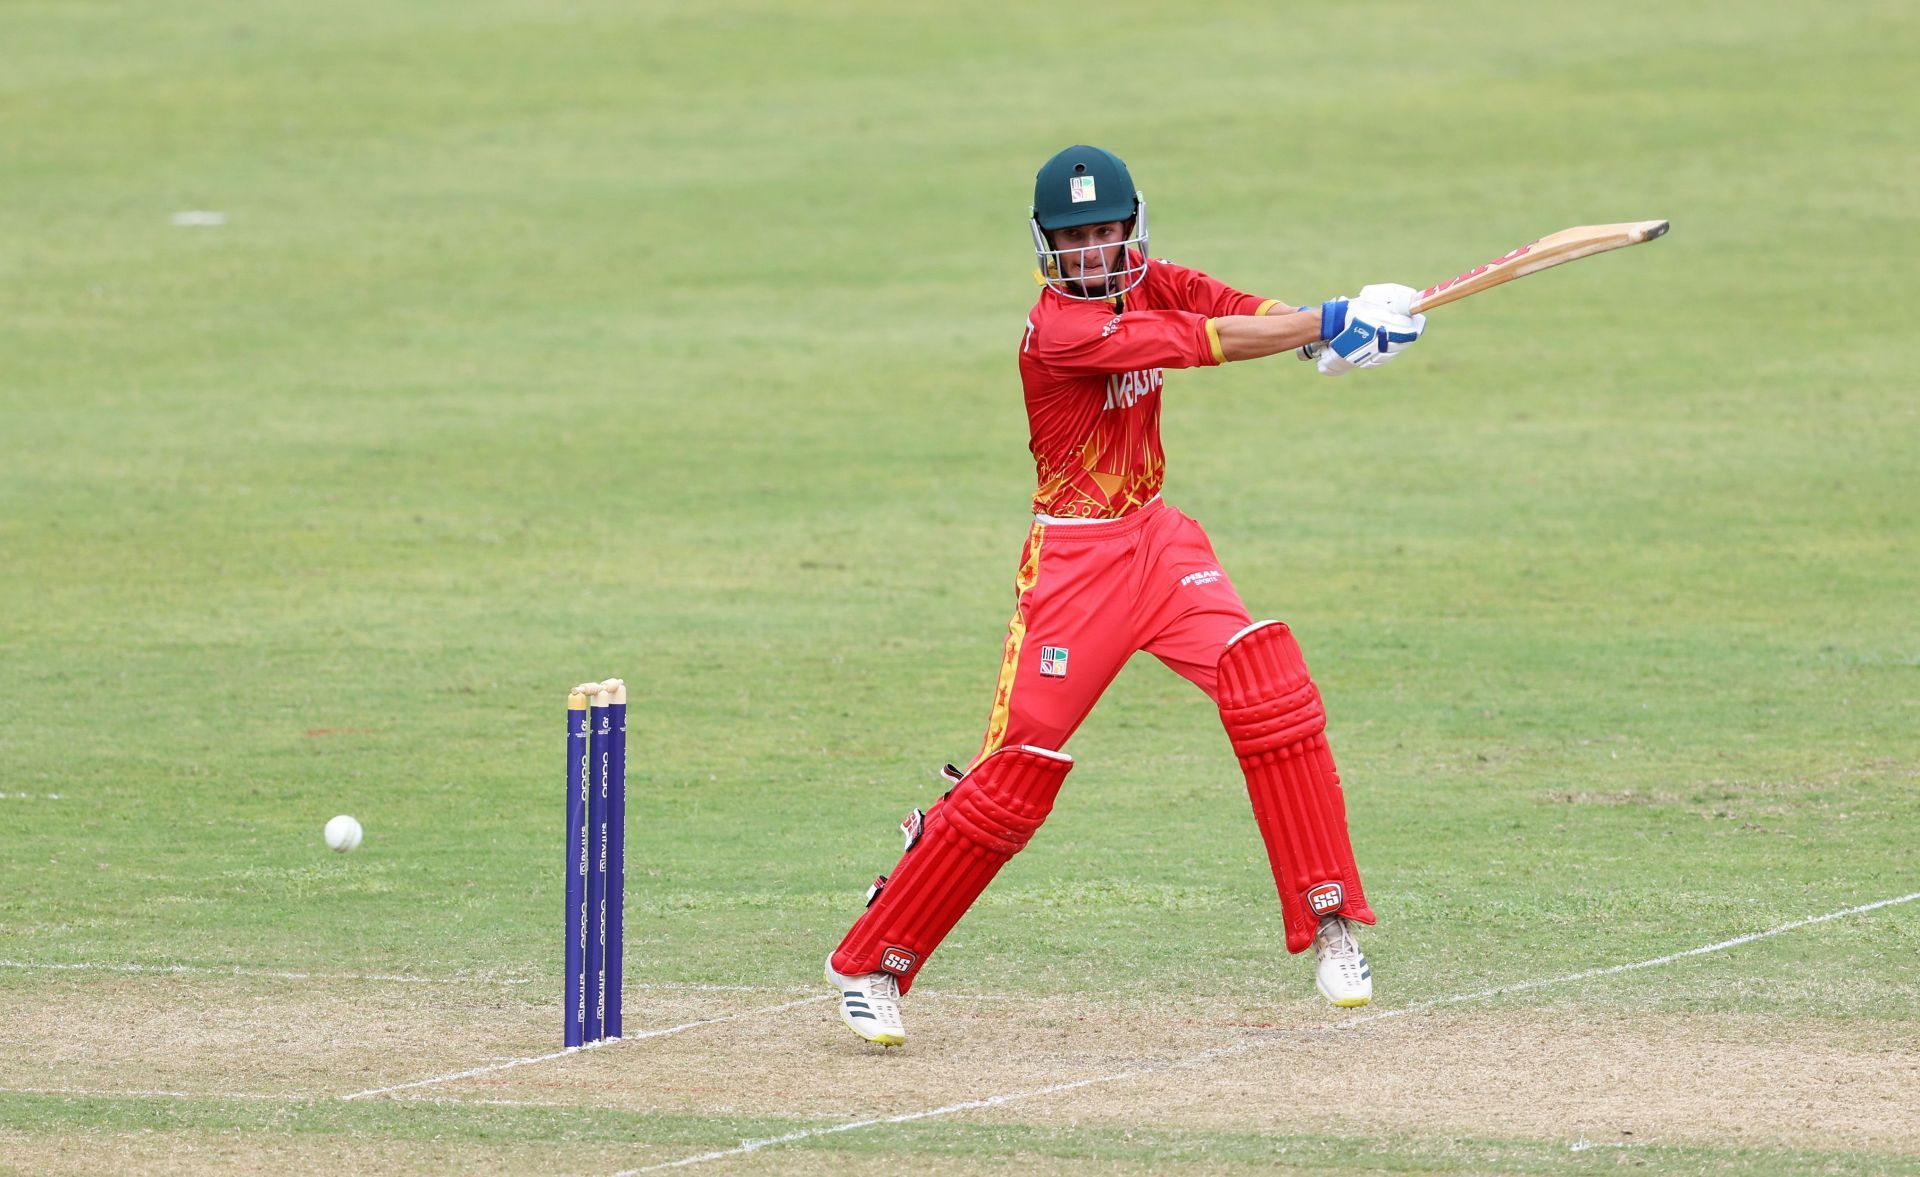 Zimbabwe U19 batter in action during U19 World Cup 2022. Pic Courtesy: Cricket World Cup